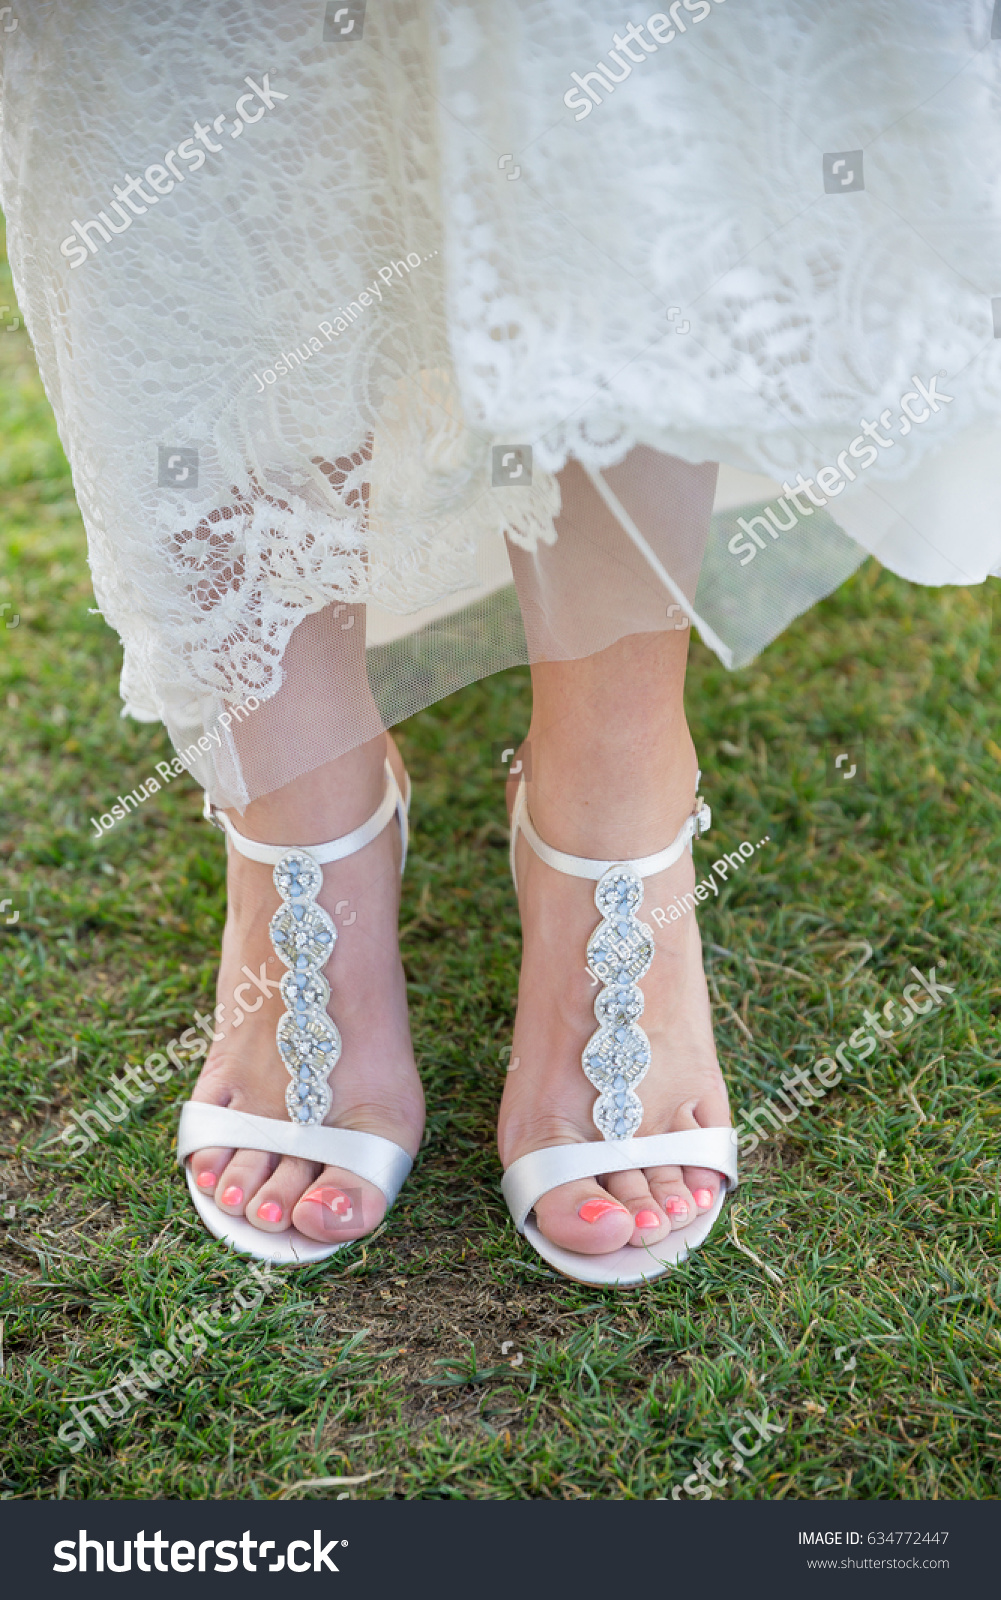 wedding shoes for grass